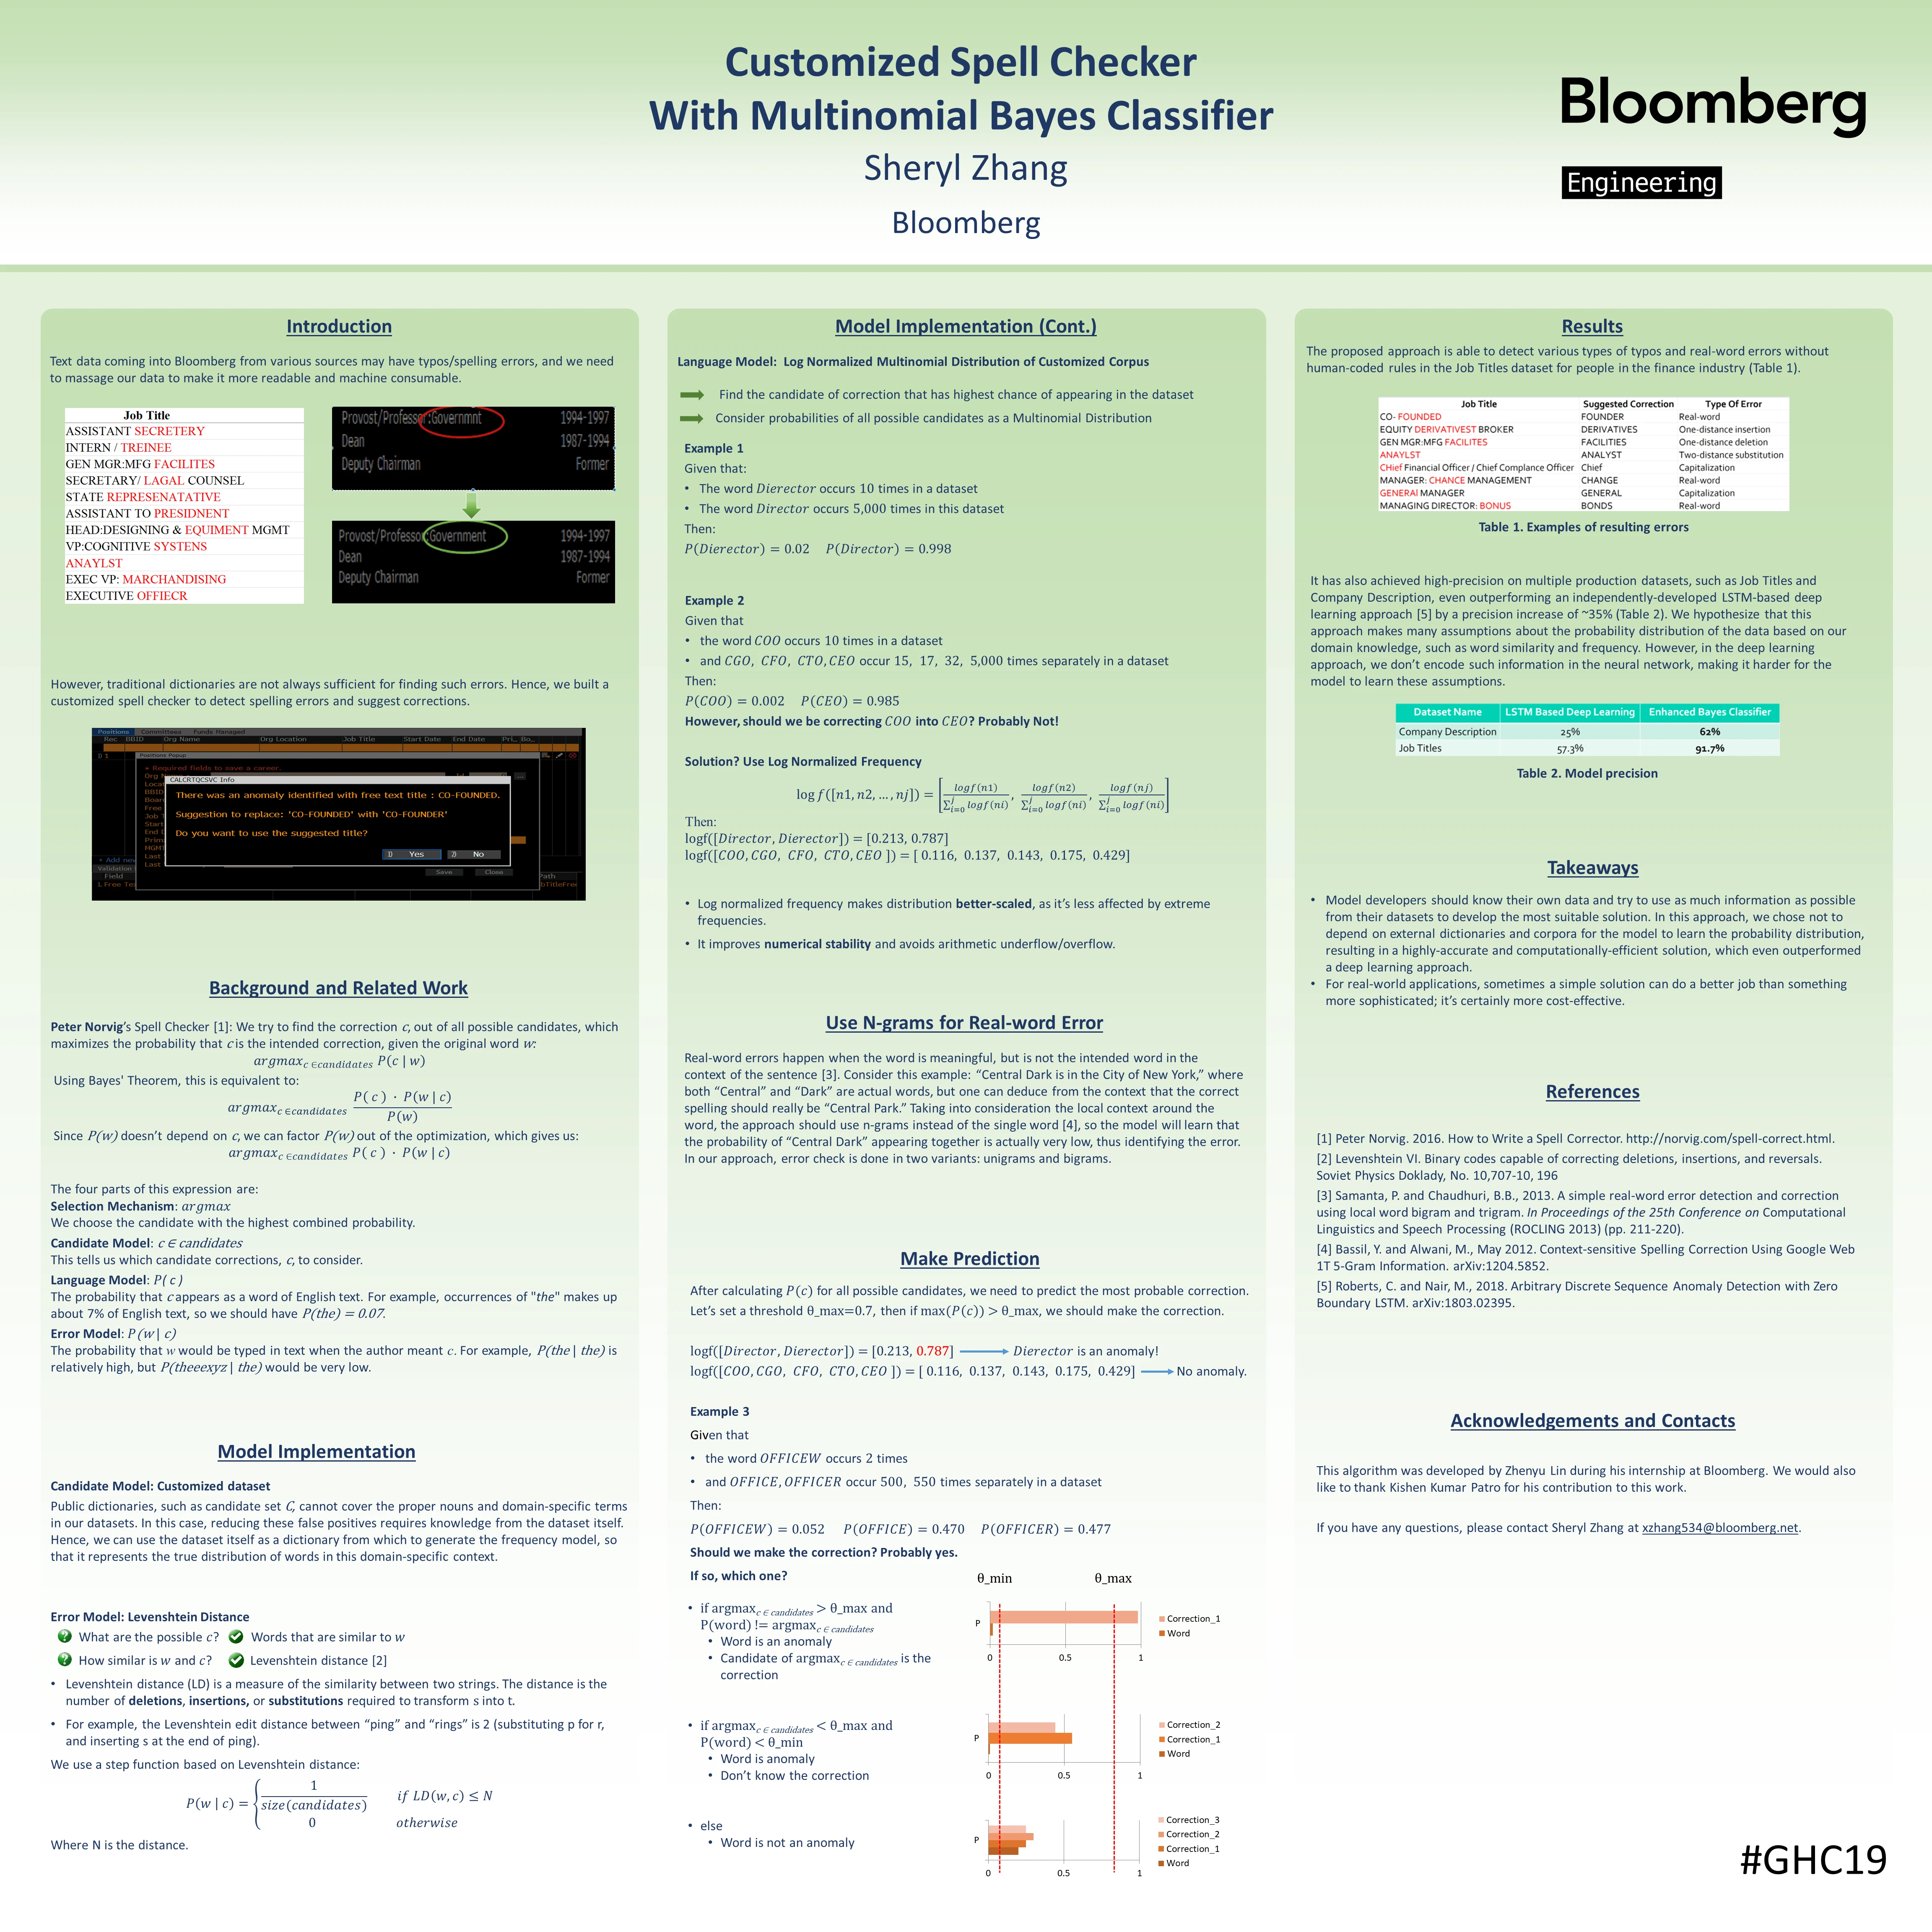 A slide on Customized Spell Checker With Multinomial Bayes Classifier introduces the work completed by Sheryl Zhang at Bloomberg. After an introduction, background, and detailing related work, it delves into model implementation, the use of N-grams for Real-word Error, then results and takeaways.